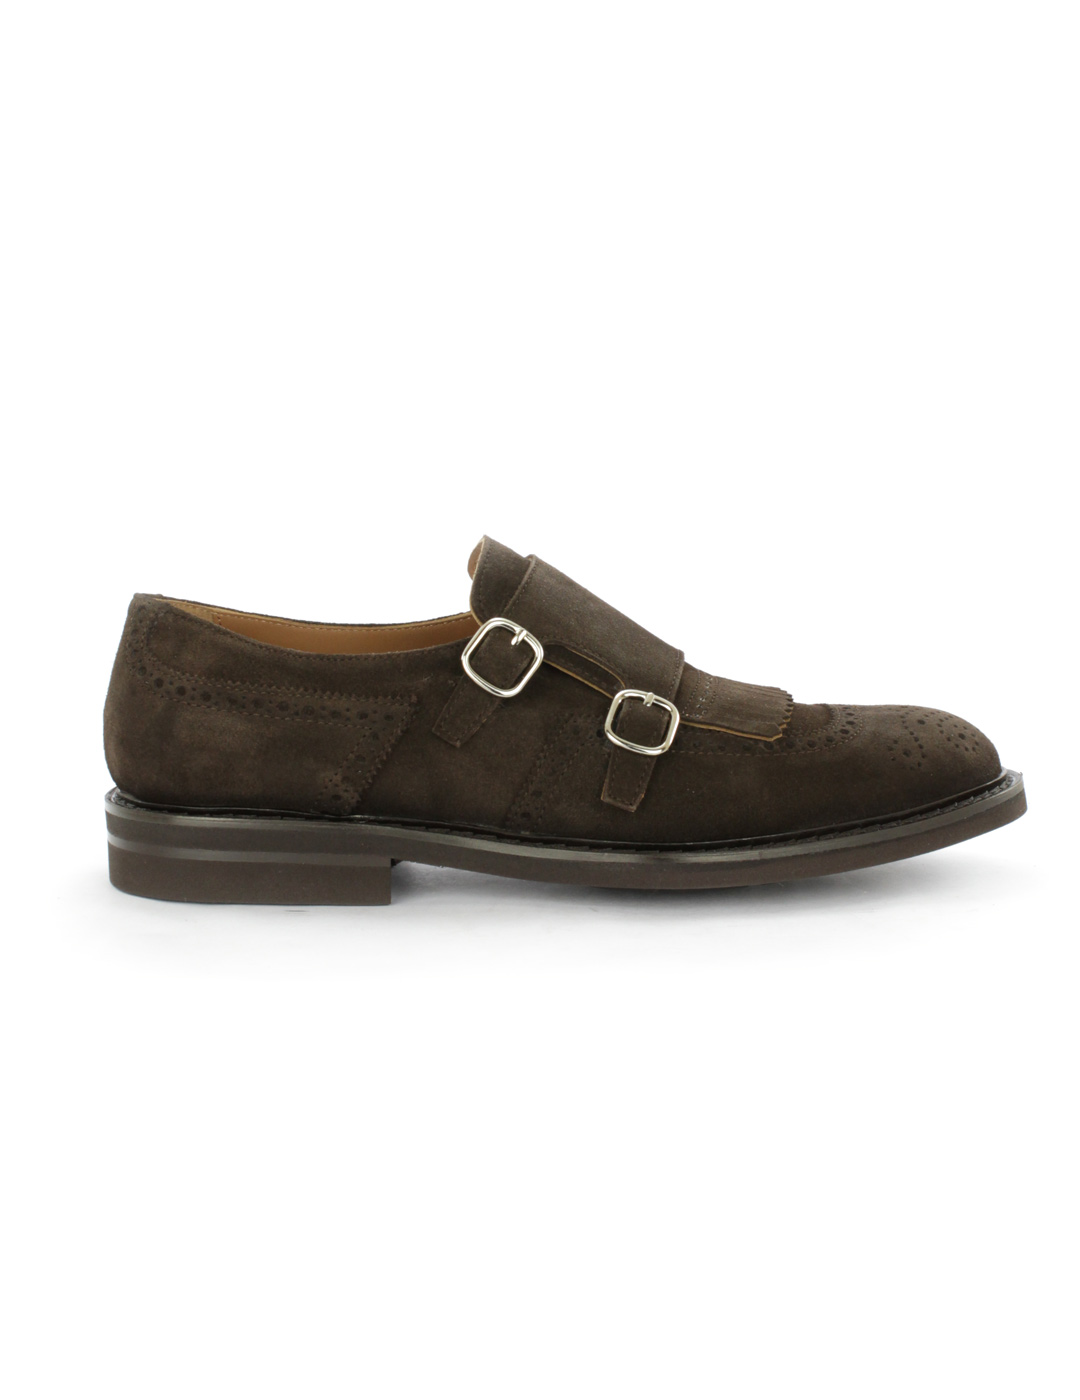 Calce Shoes Brown Suede Buckle Shoes